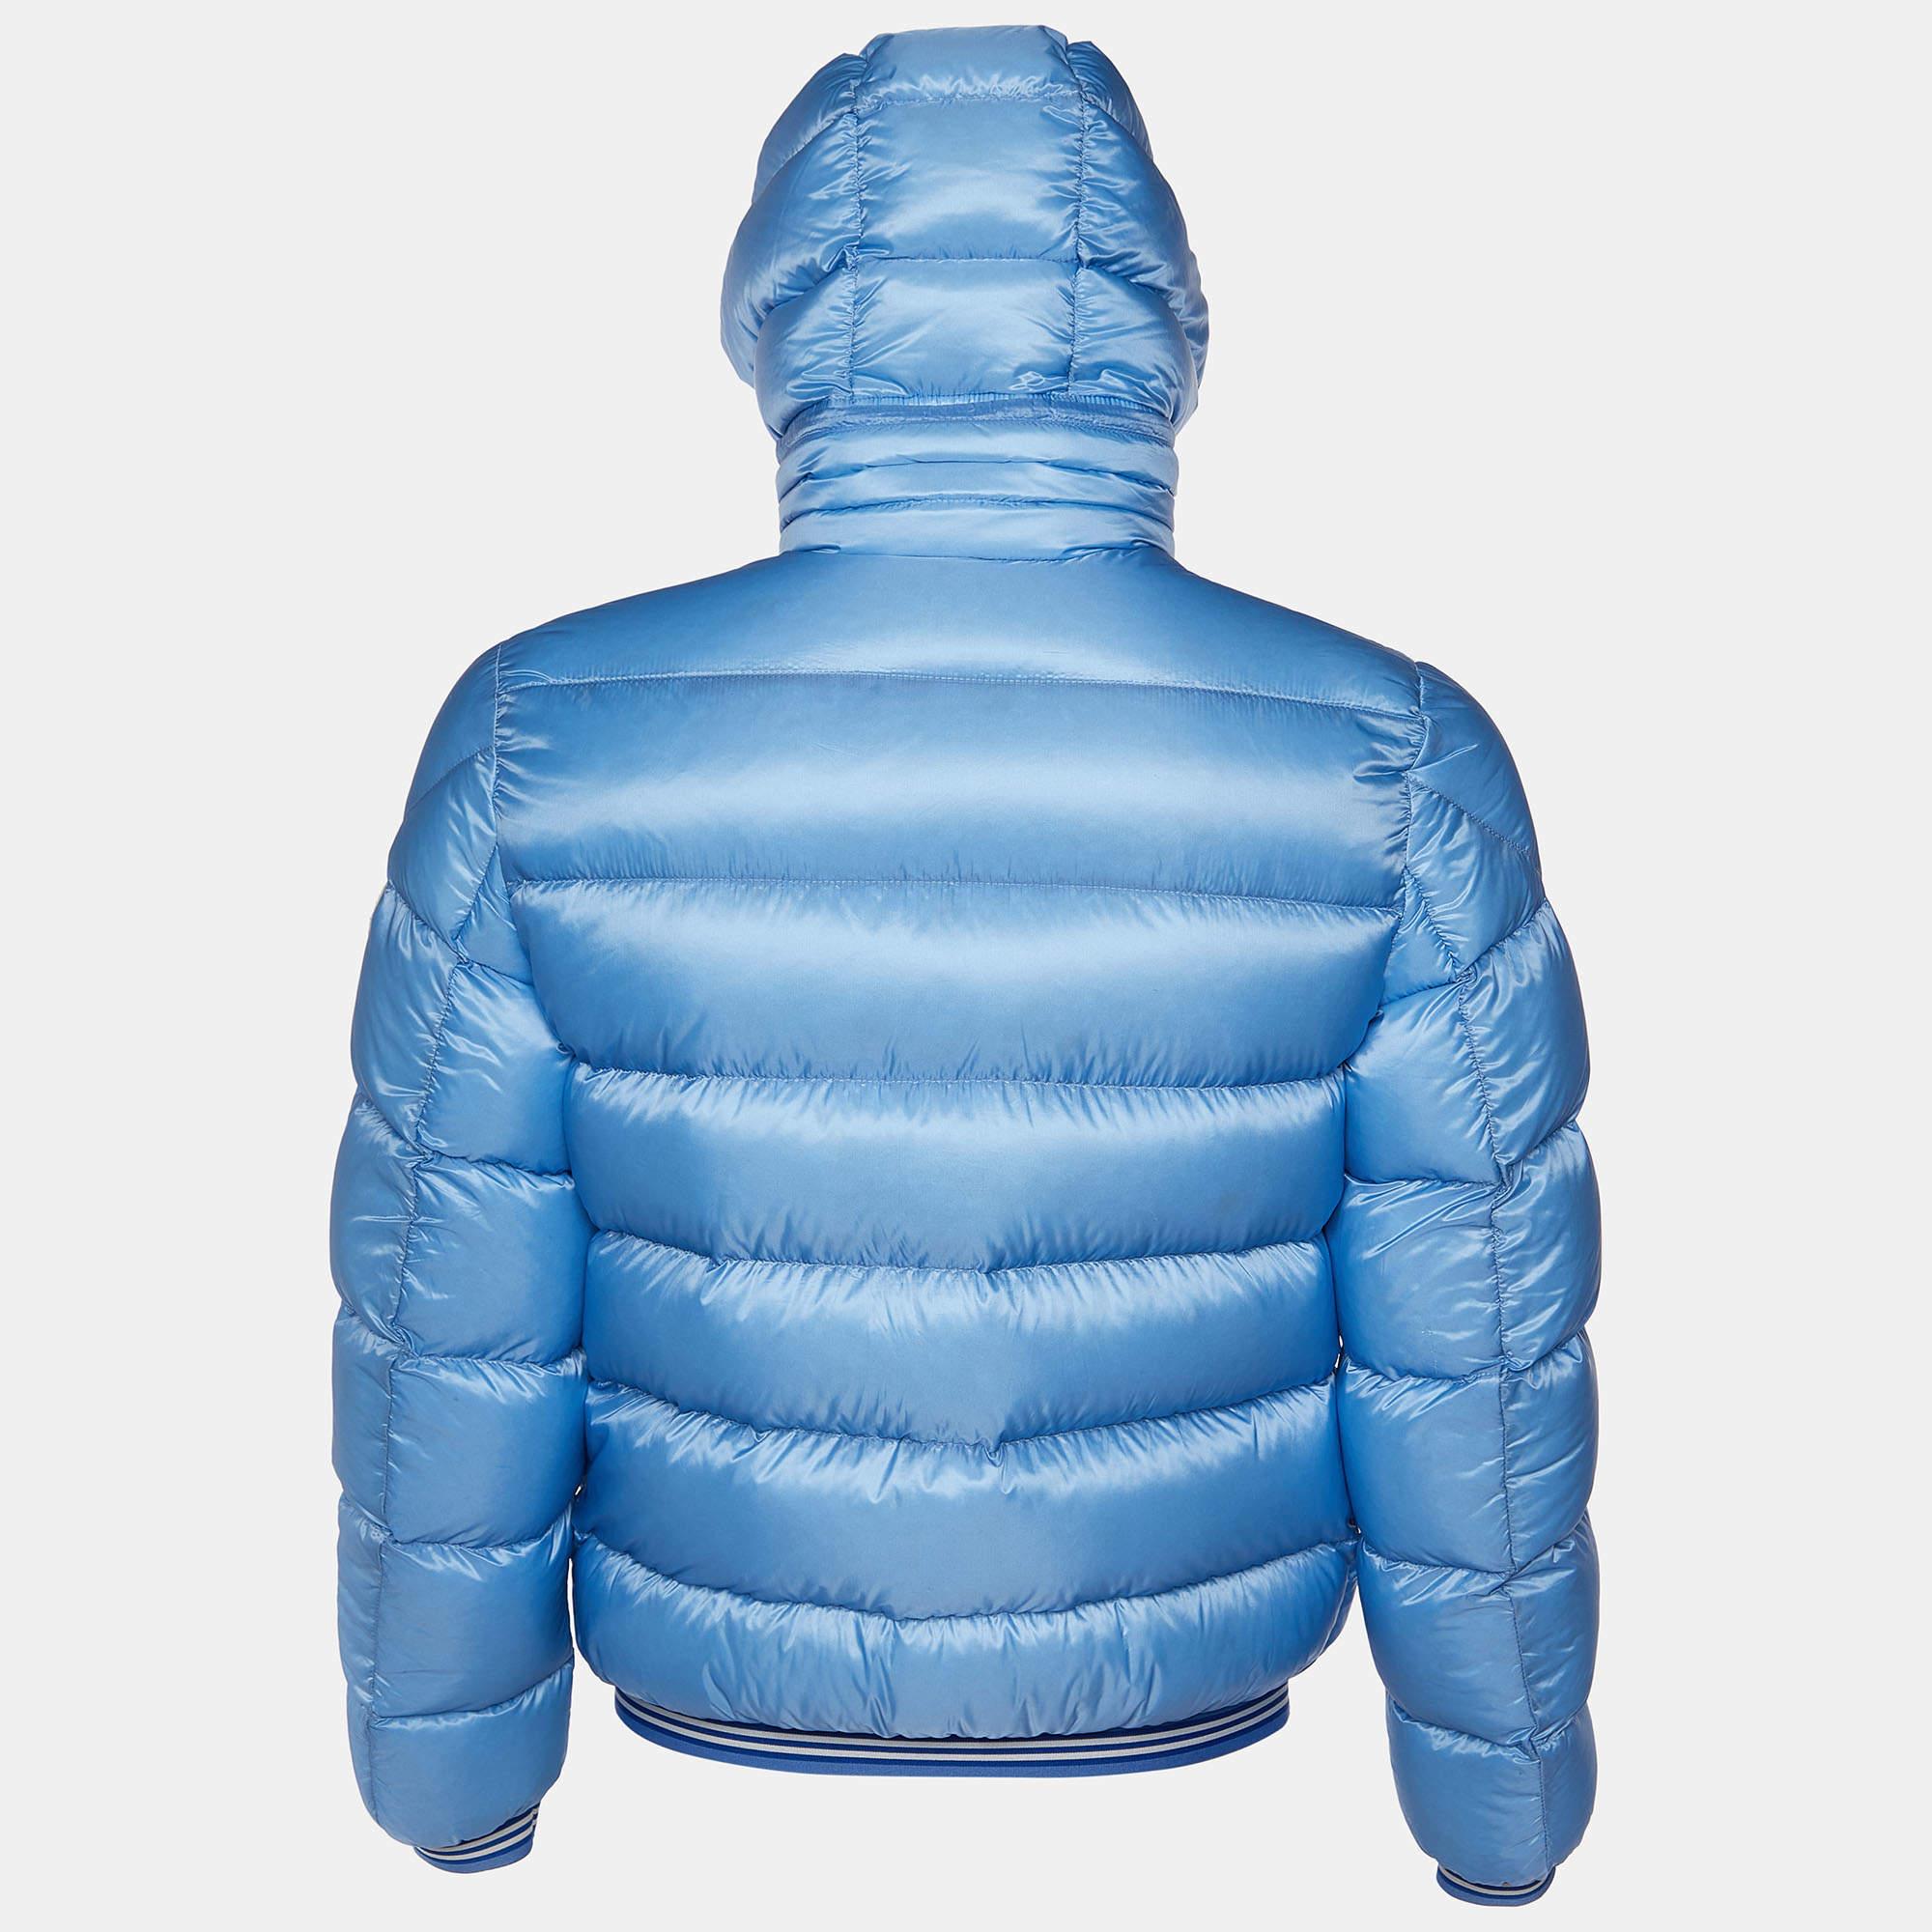 An elegant silhouette, smart fit, and perfect tailoring make this Moncler jacket a fine choice. It is made of quality materials, secured with front zip closure, and added with two pockets.

